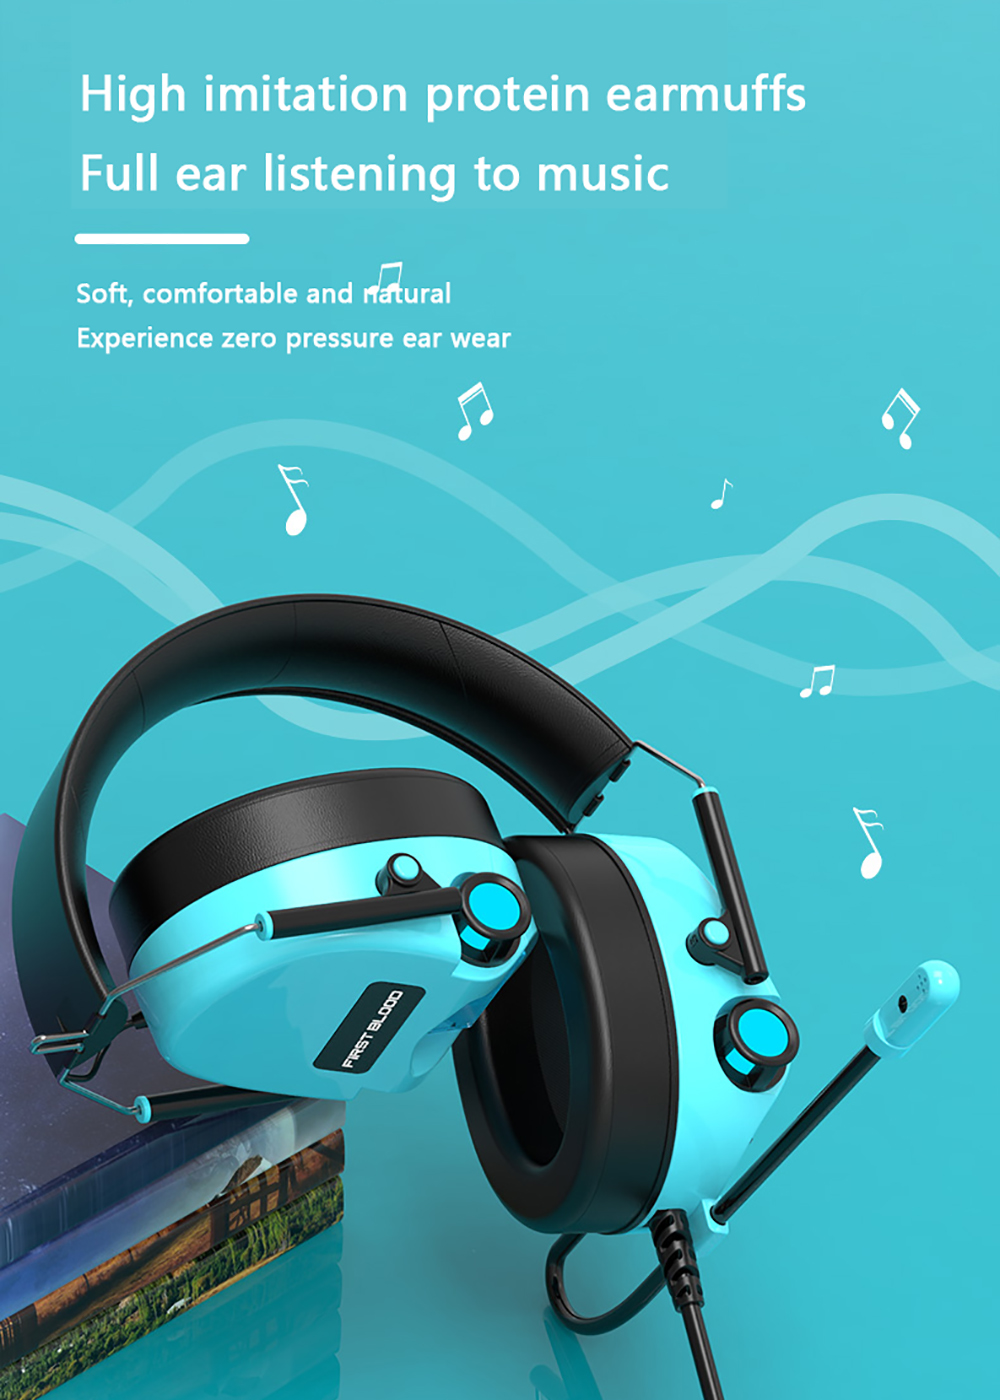 FirstBlood-H10-Gaming-Headset-Foldable-Headphone-with-Virtual-71-One-way-Noise-Reduction-Microphone--1908998-3